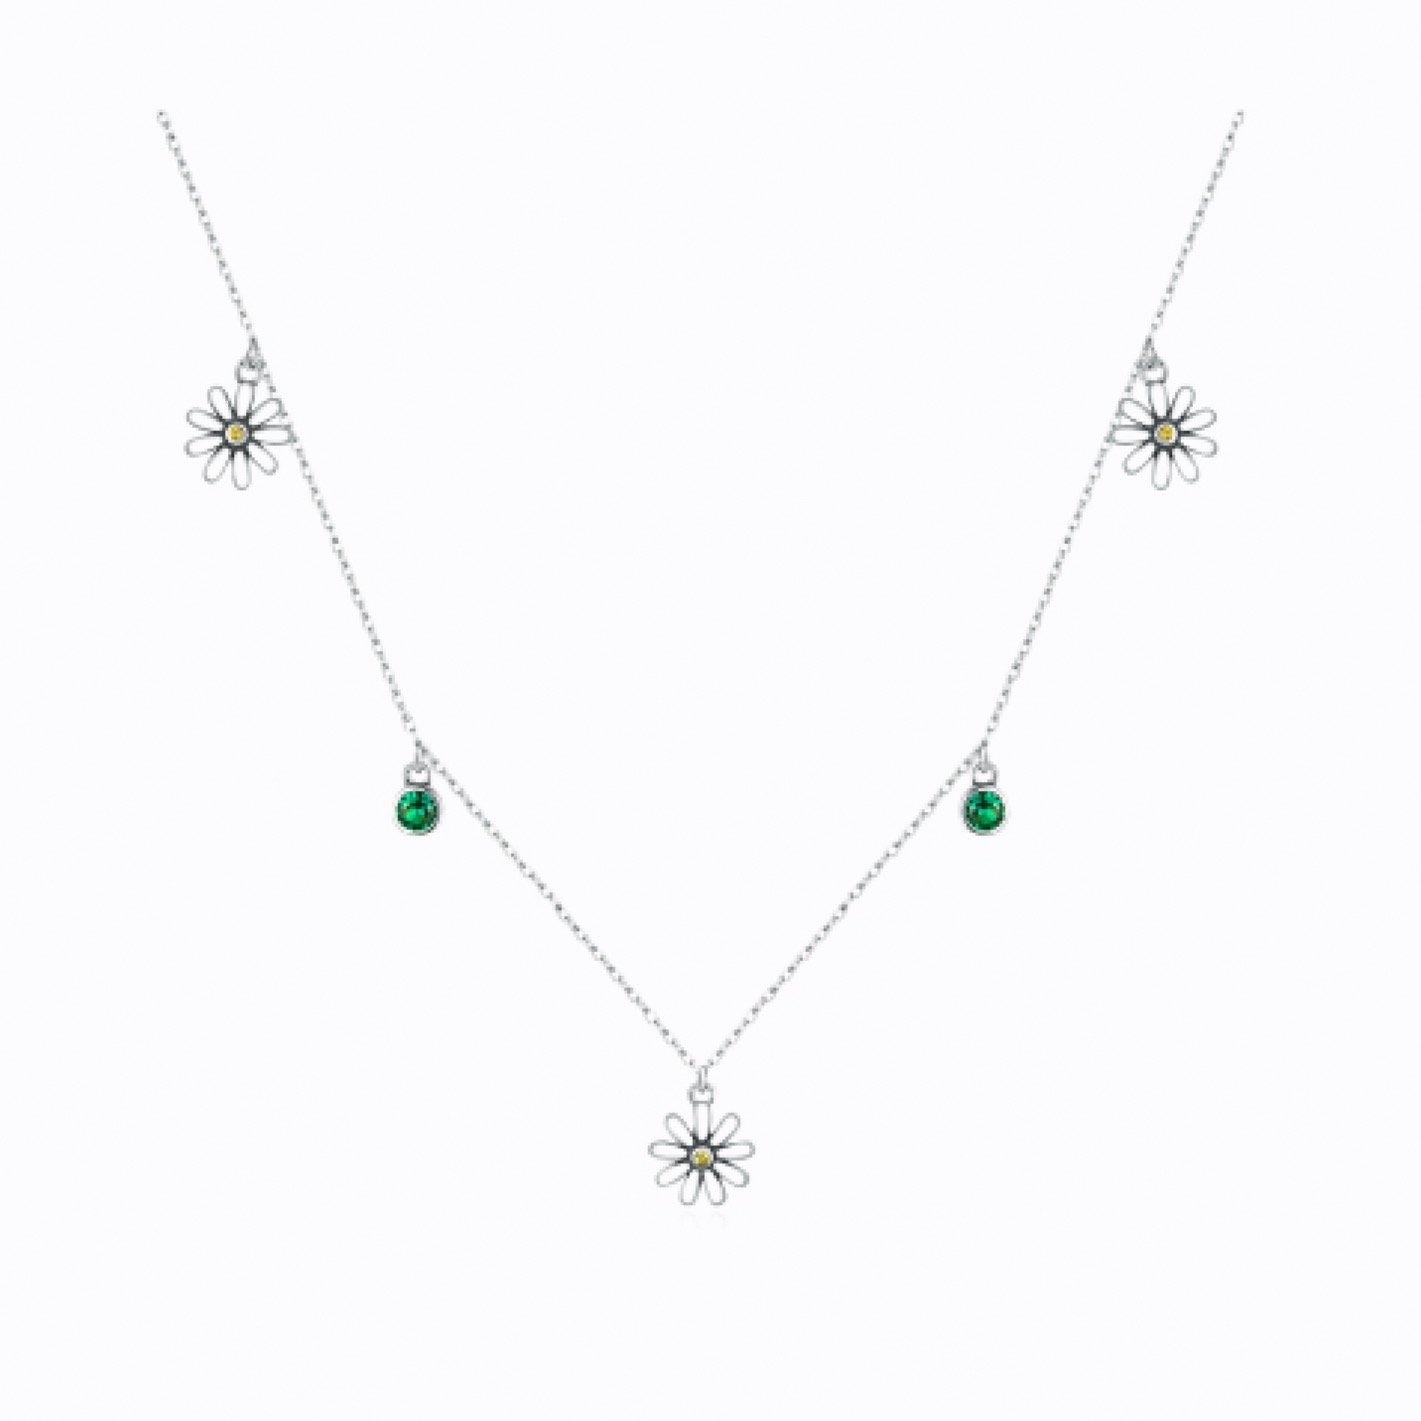 Daisy Chain Necklace, Sterling Silver